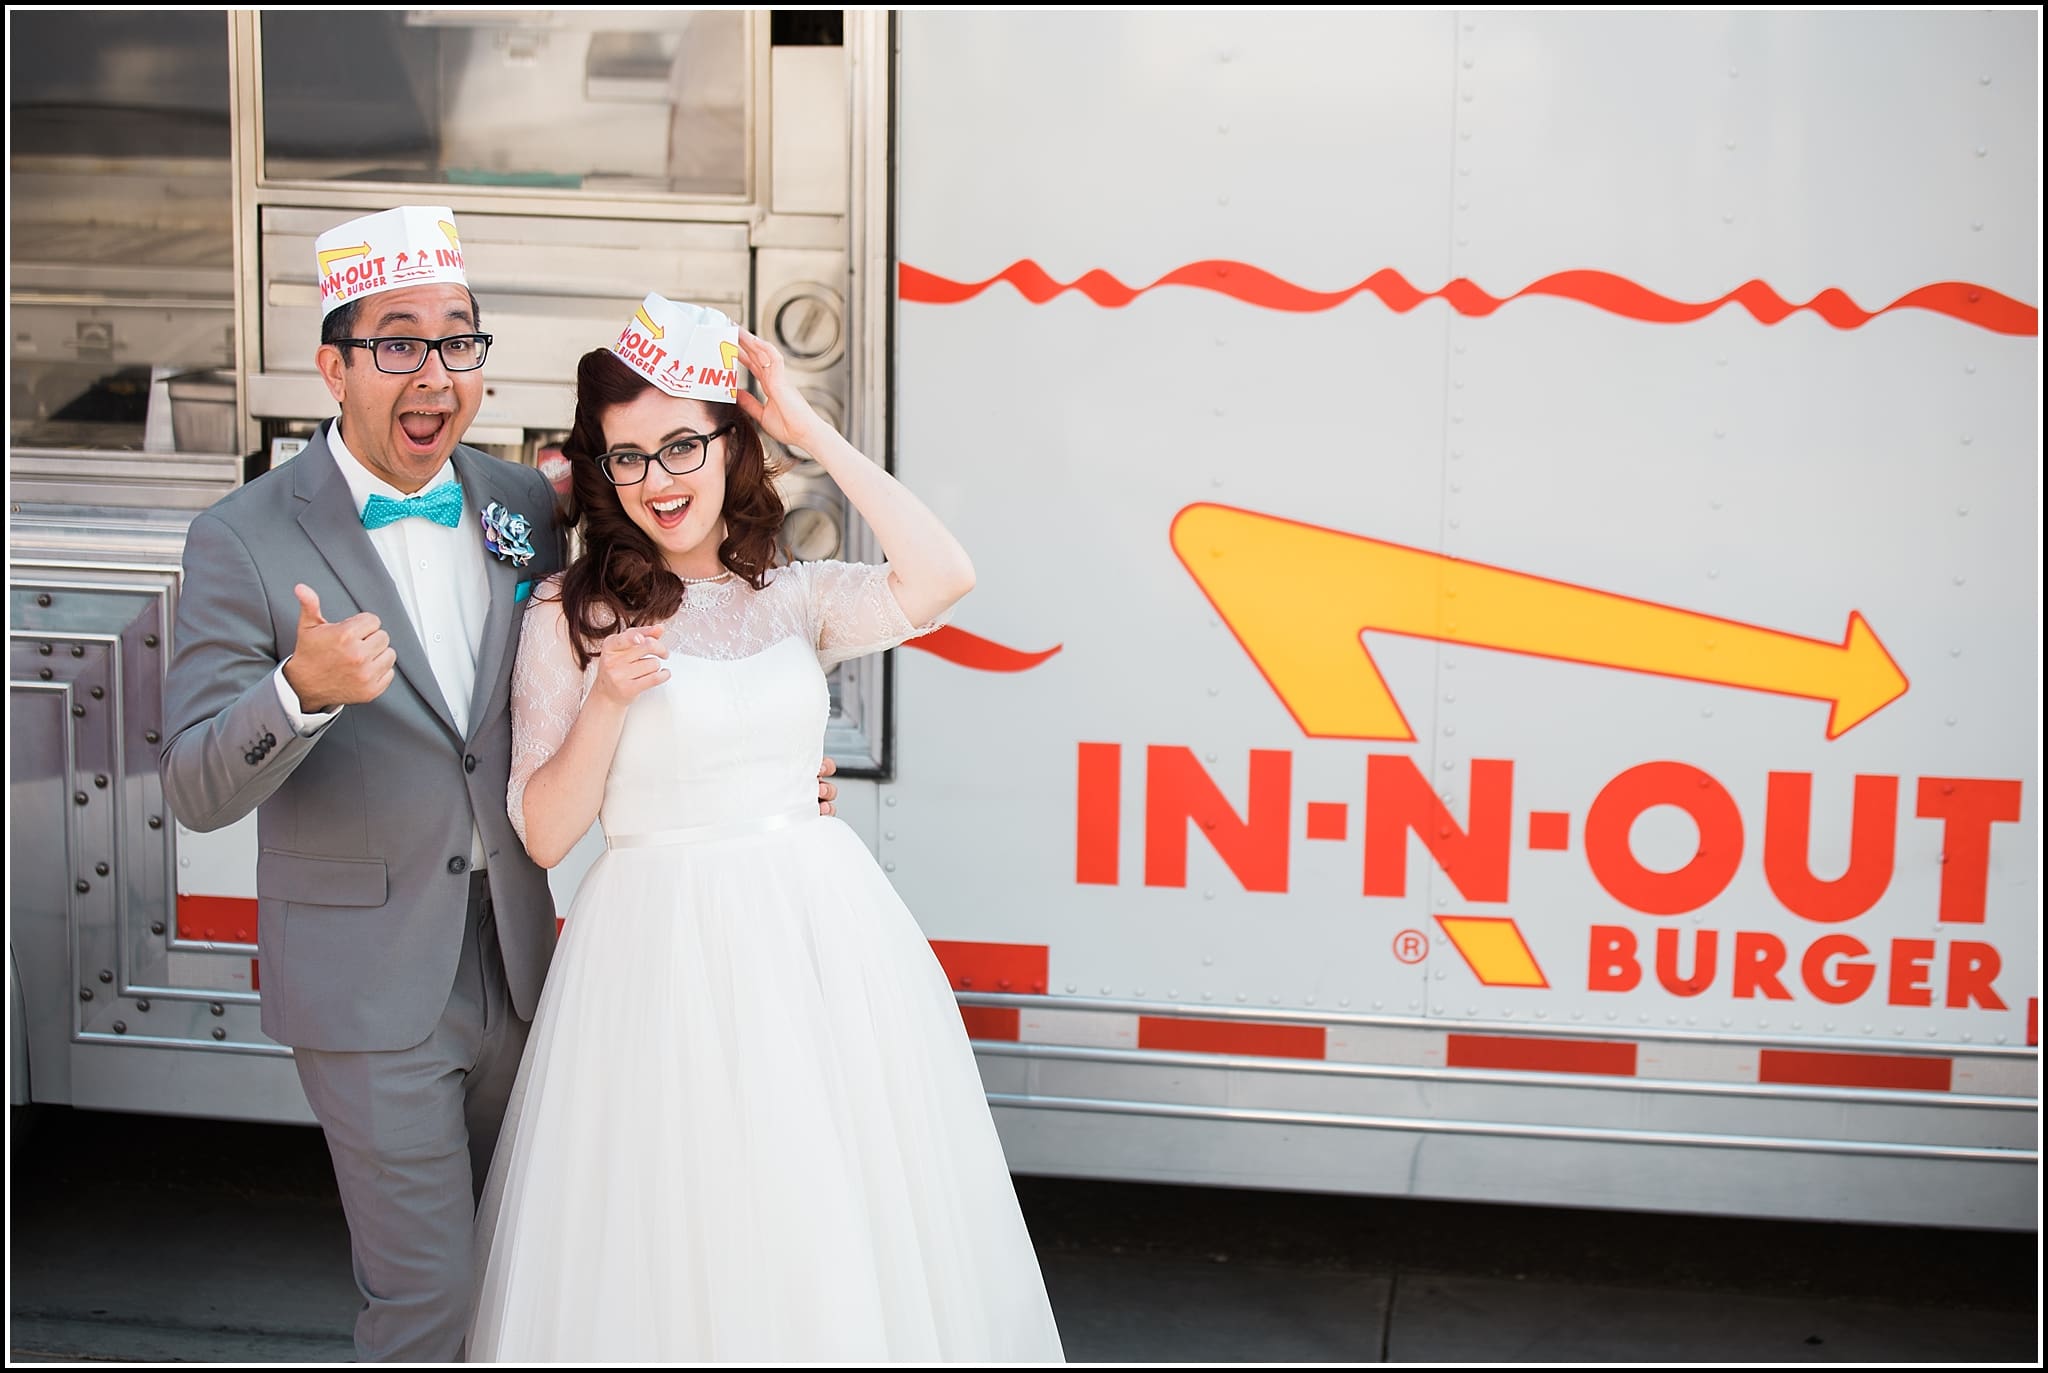  favorite wedding images 2016, wedding photos from 2016, our favorite wedding photos, in n out wedding catering